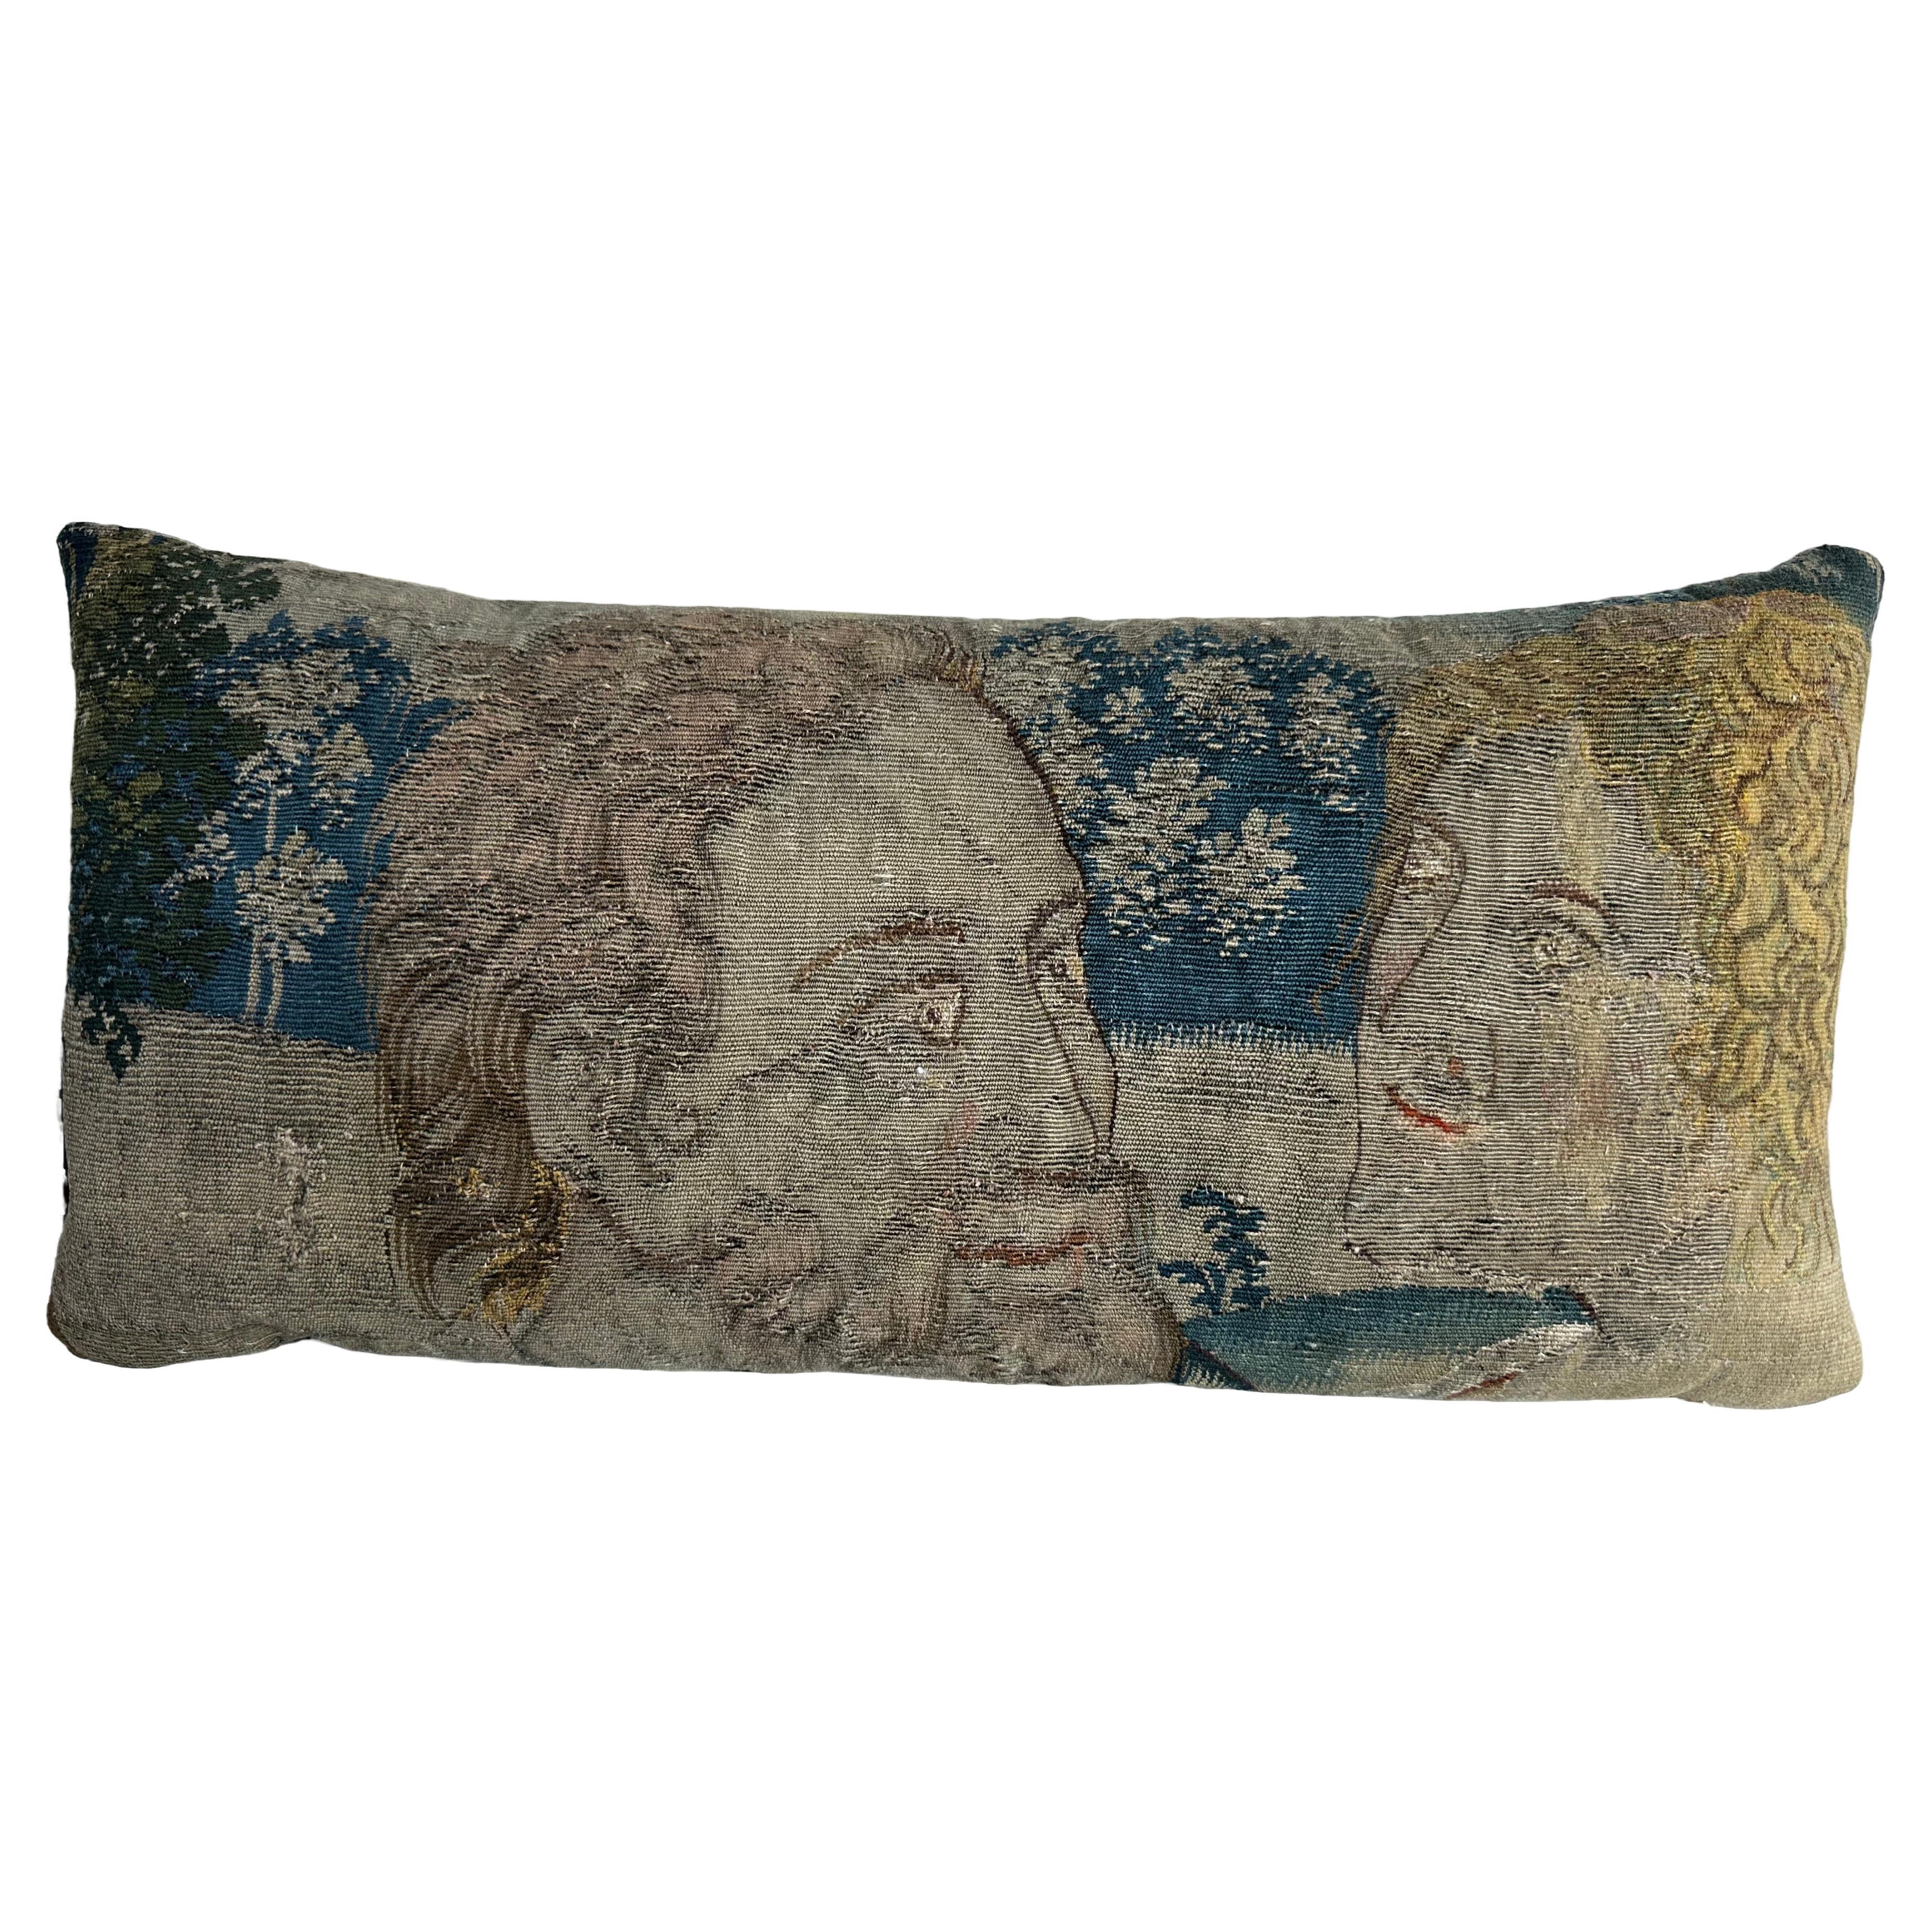 Brussel 16th Century Pillow - 24" X 12" For Sale